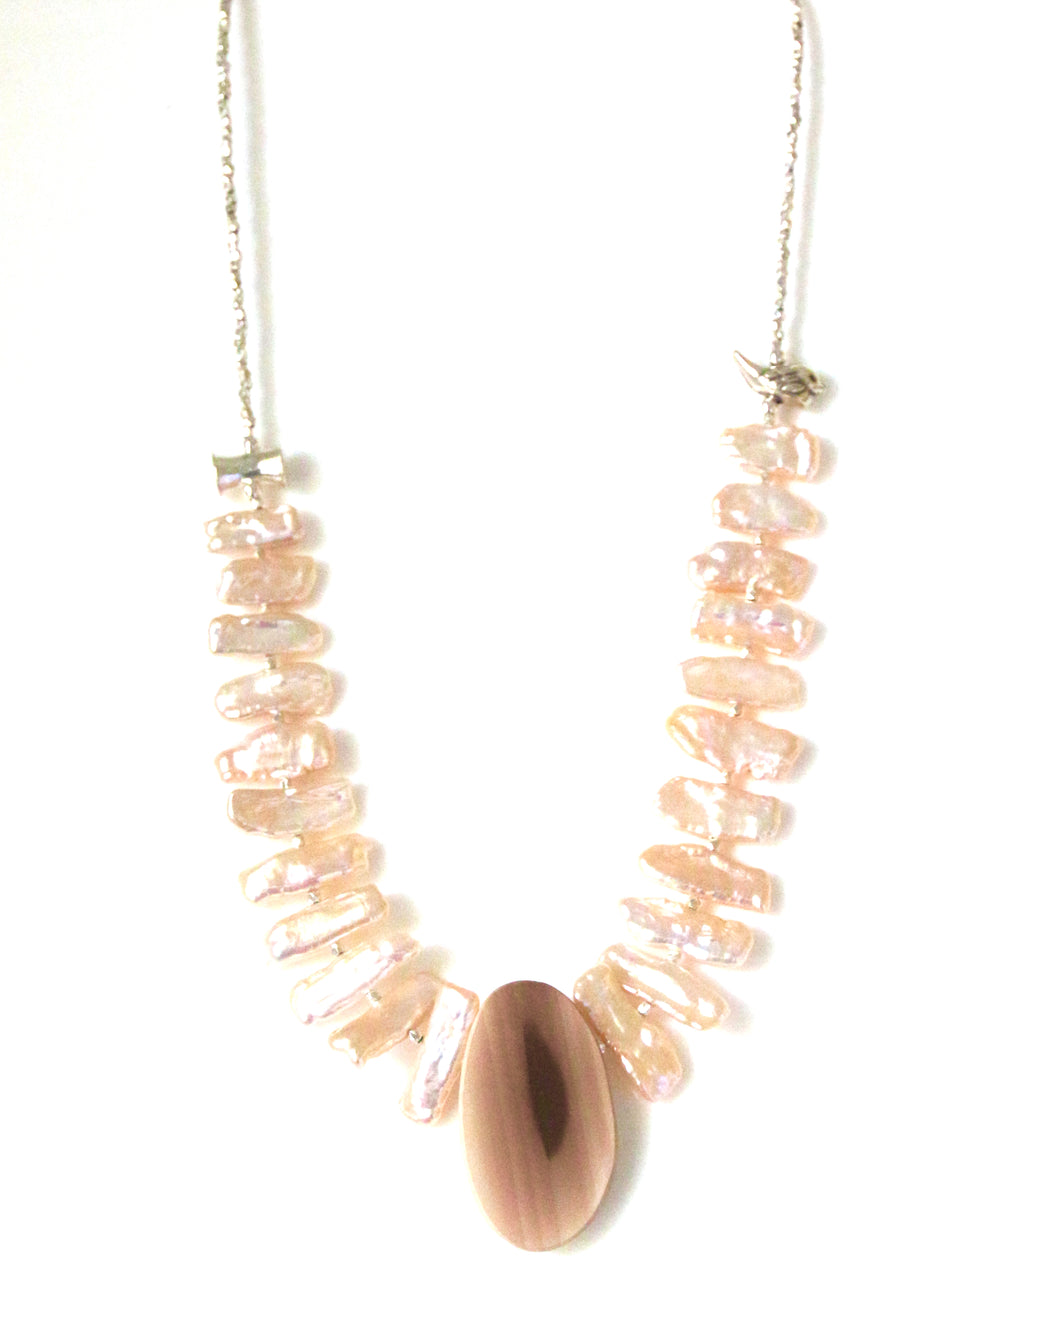 Australian Handmade Pink Necklace with Natural Pink Pearls Imperial Jasper and Sterling Silver